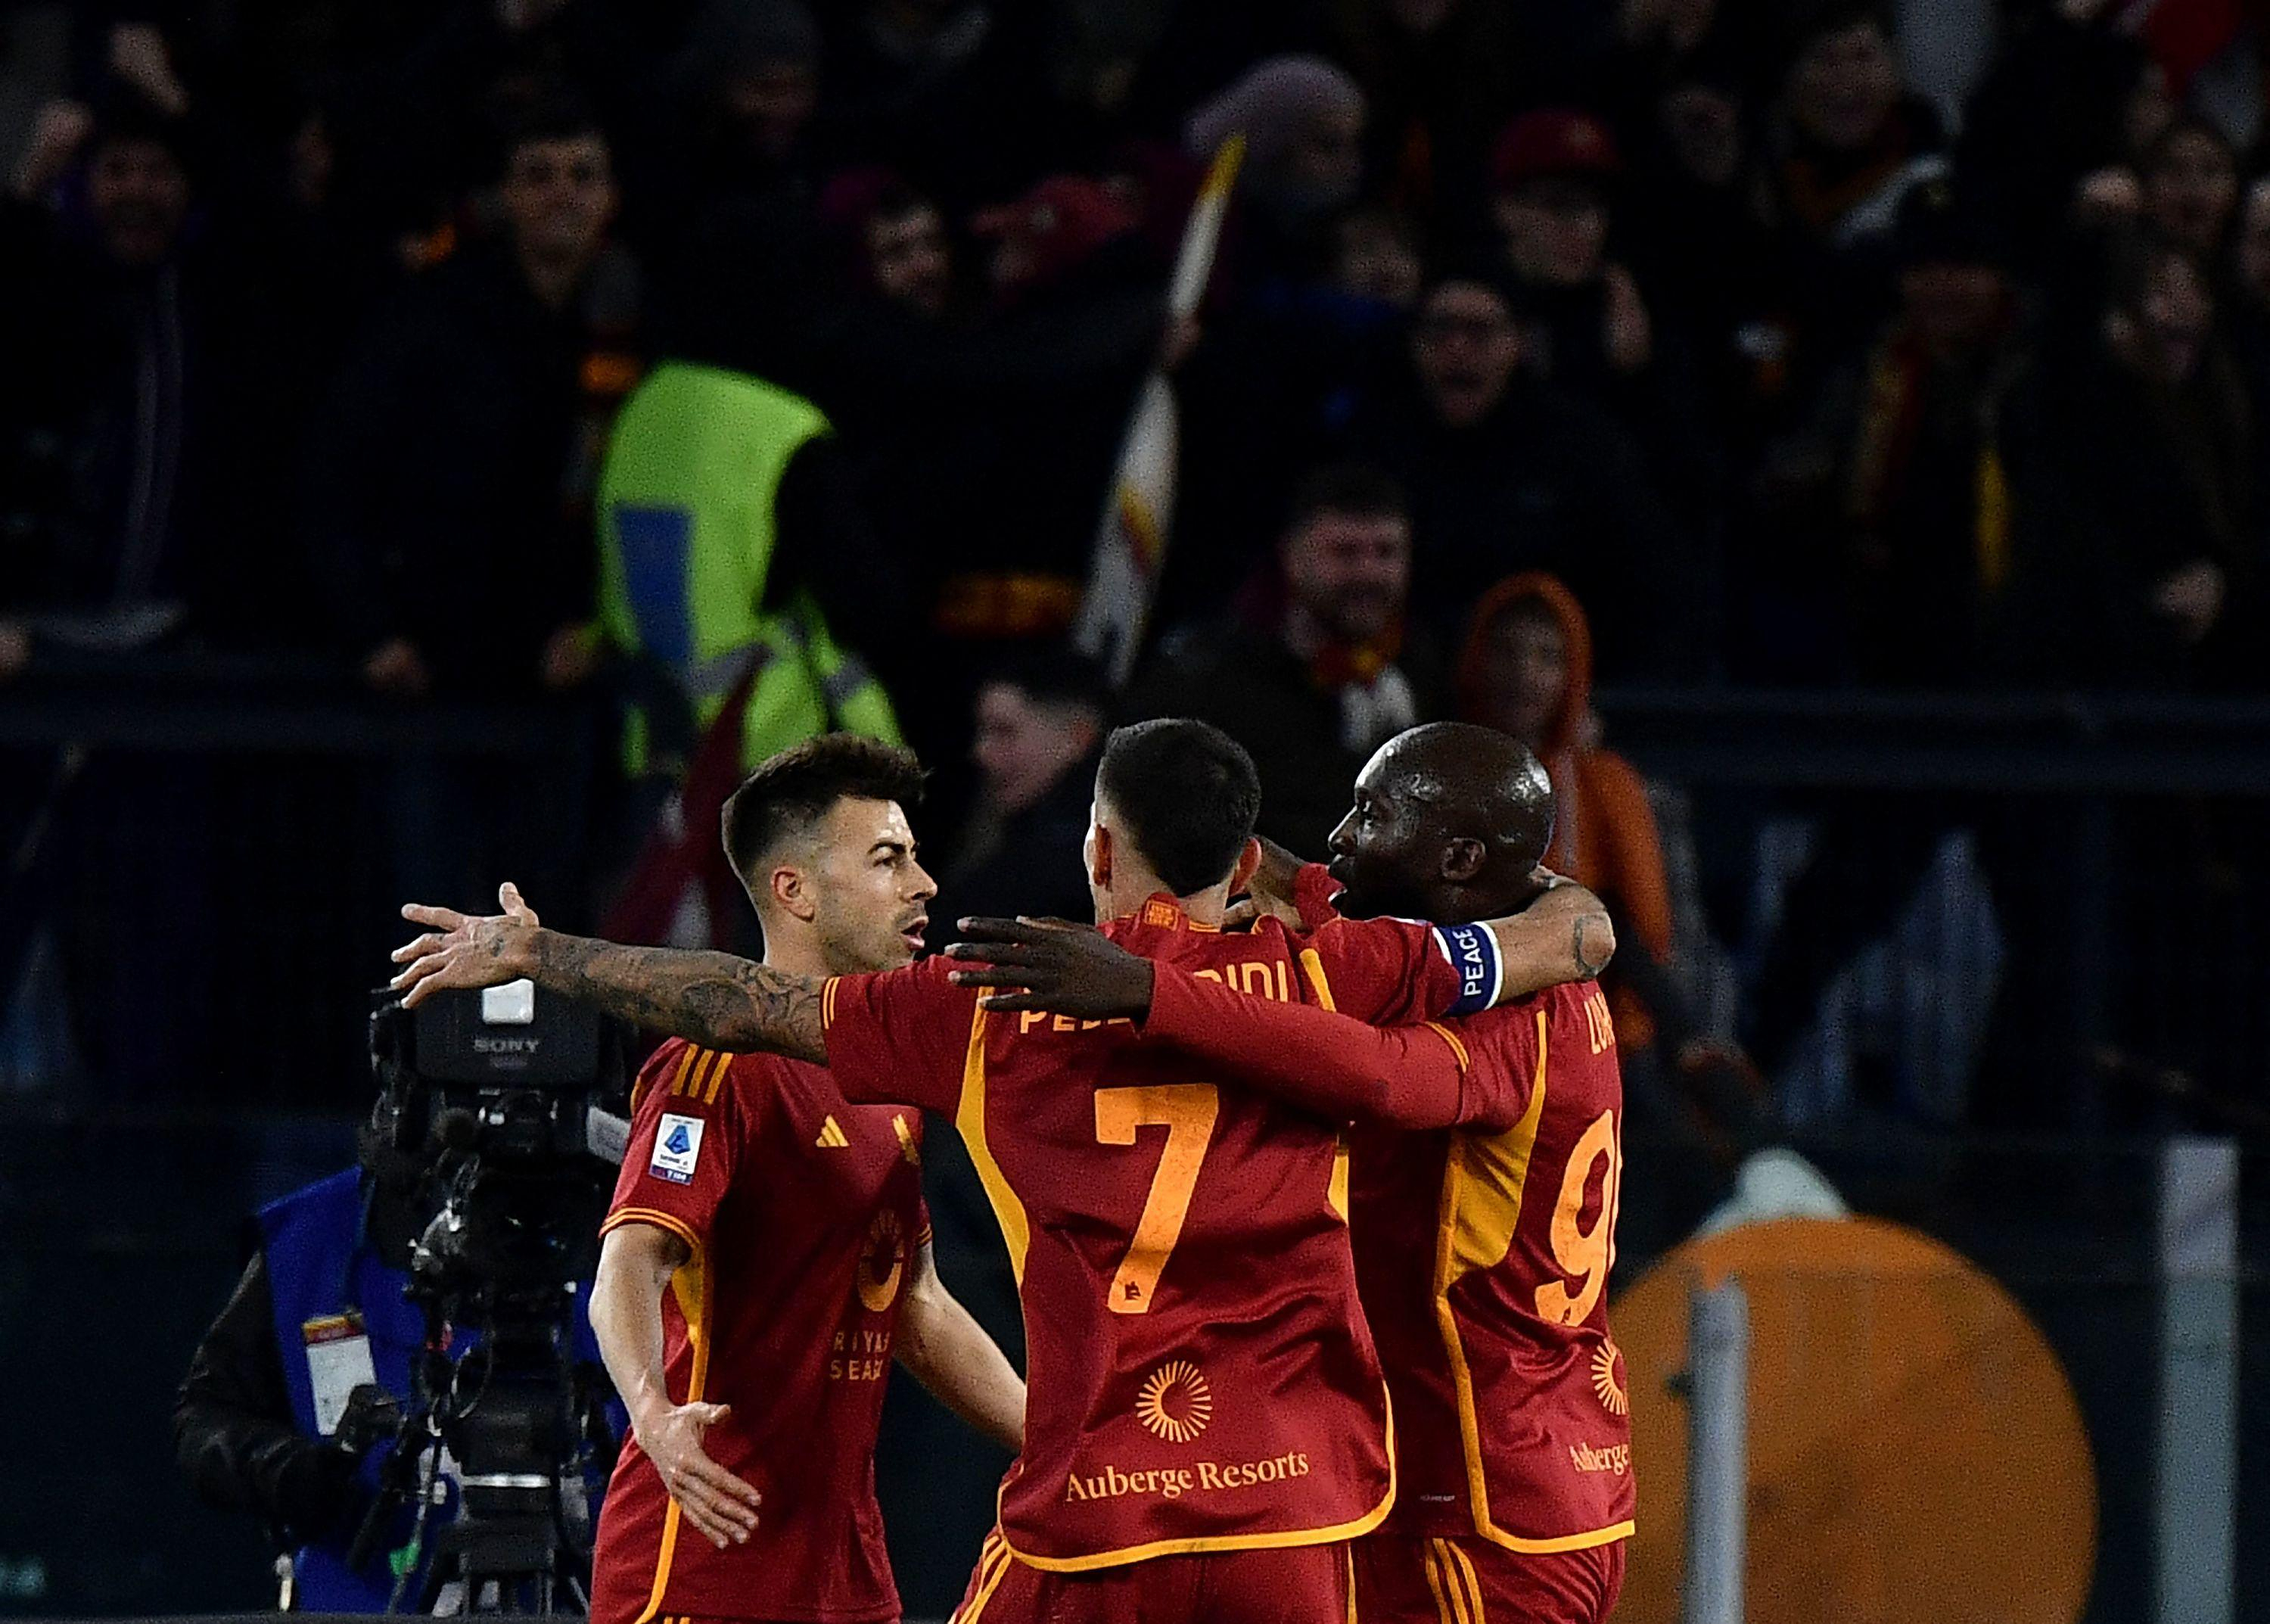 Serie A: four days after Mourinho's dismissal, Roma returns to victory